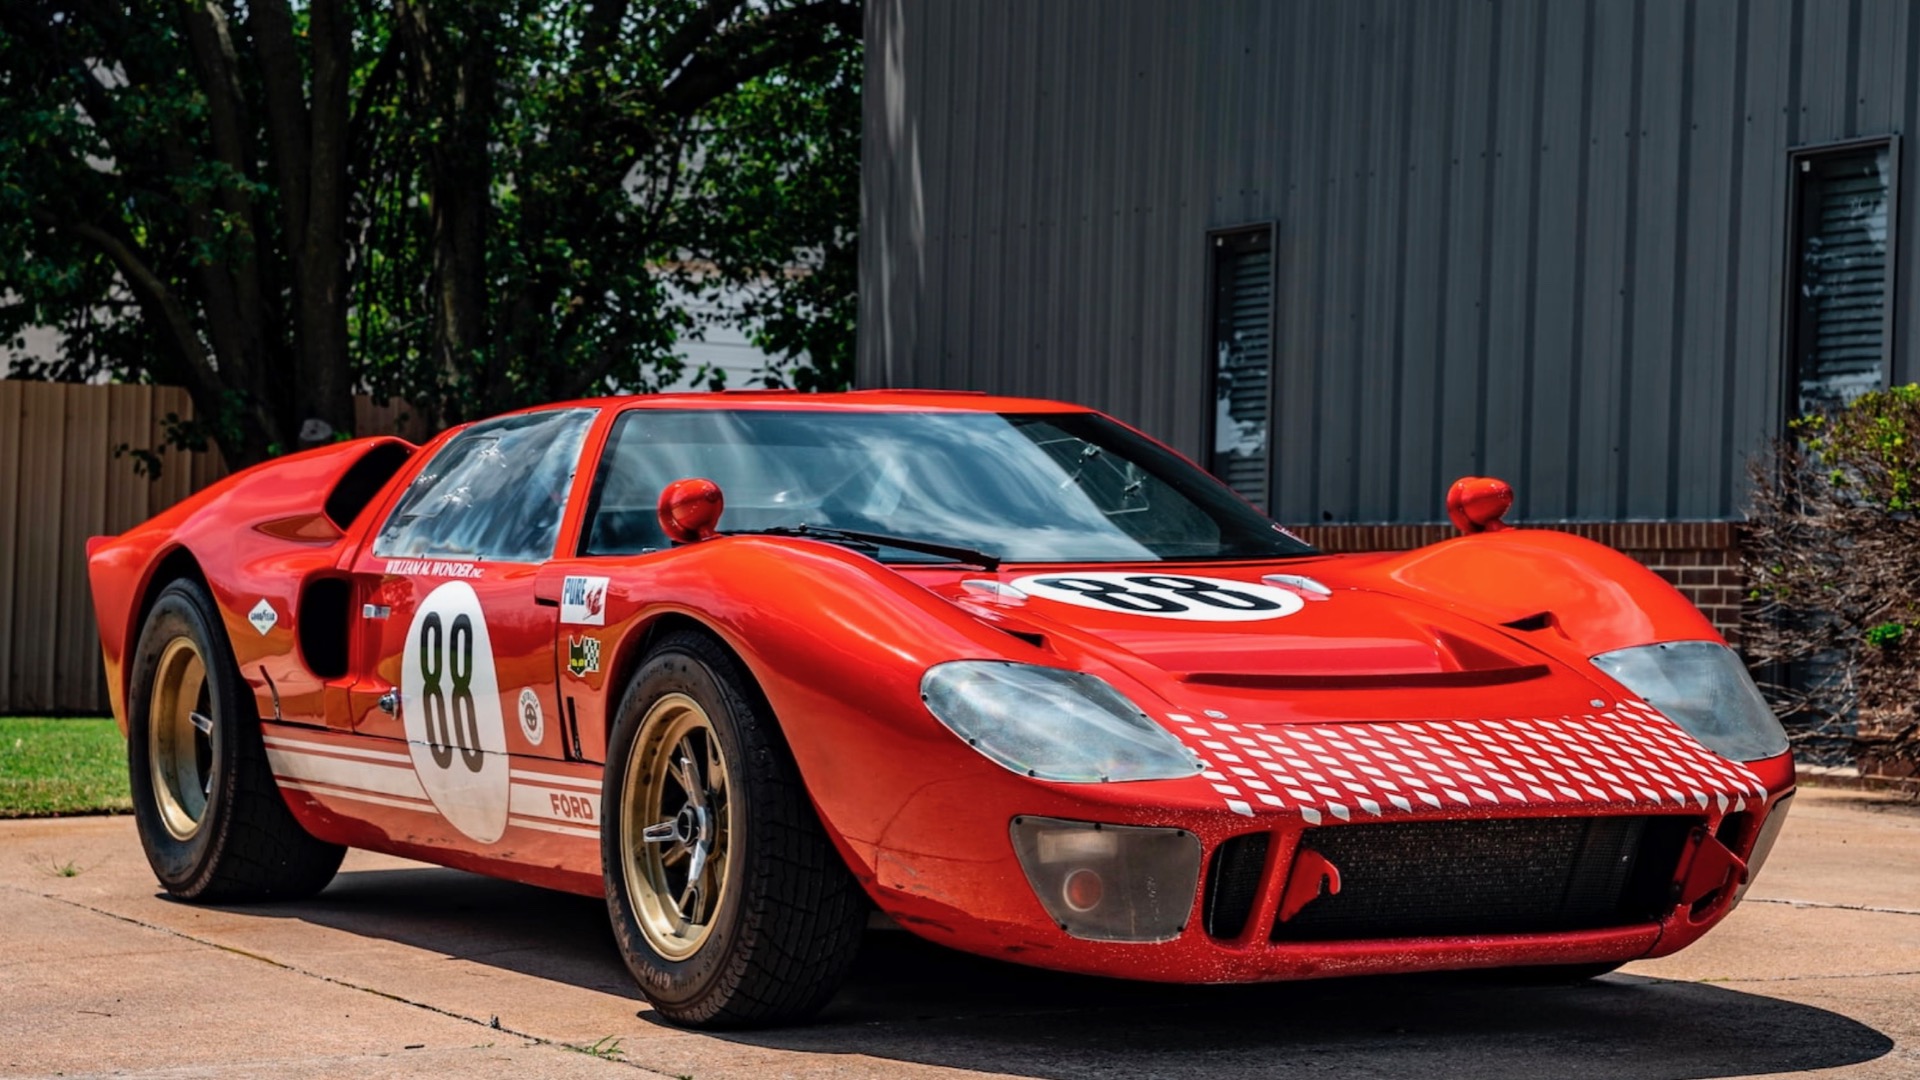 1966 Rcr Ford Gt40 Replica Stunt Car From Ford V Ferrari Heads To Auction